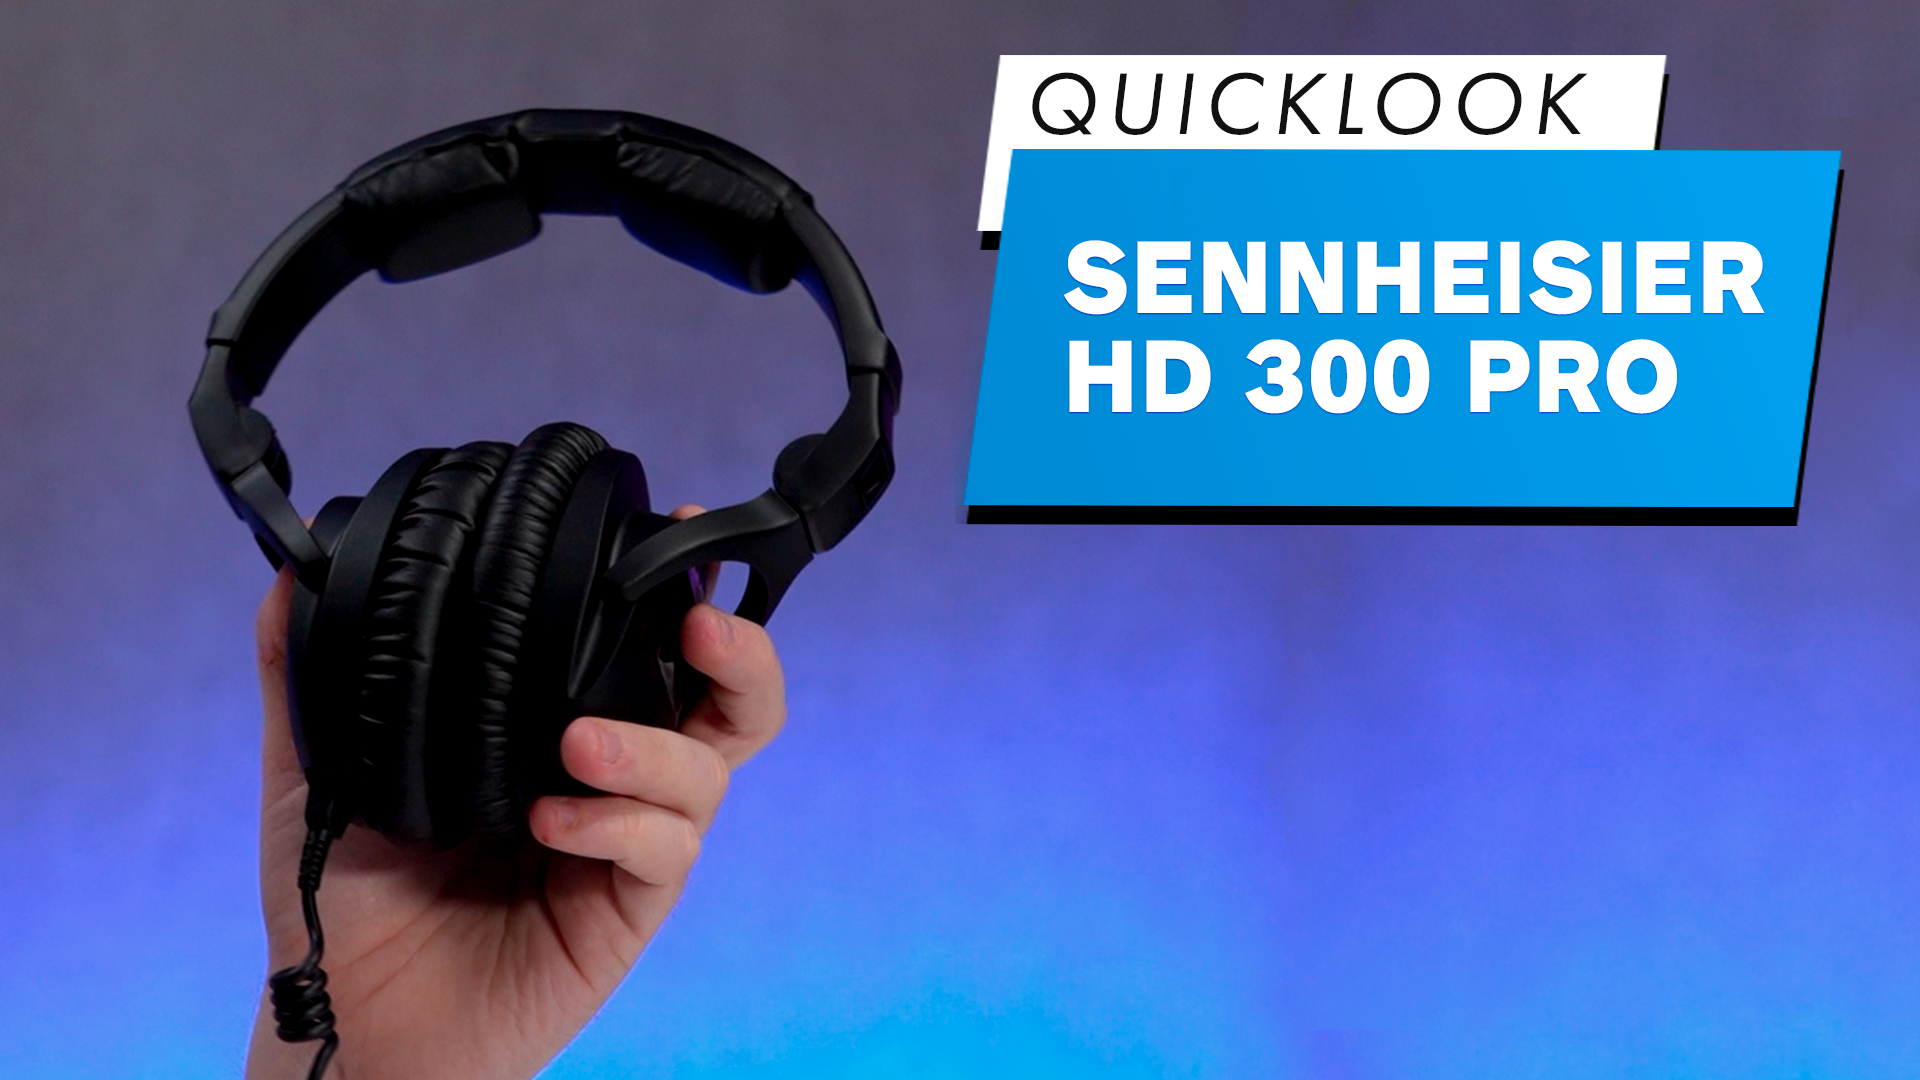 We tested the Sennheiser HD 300 Pro in the latest episode of Quick Look